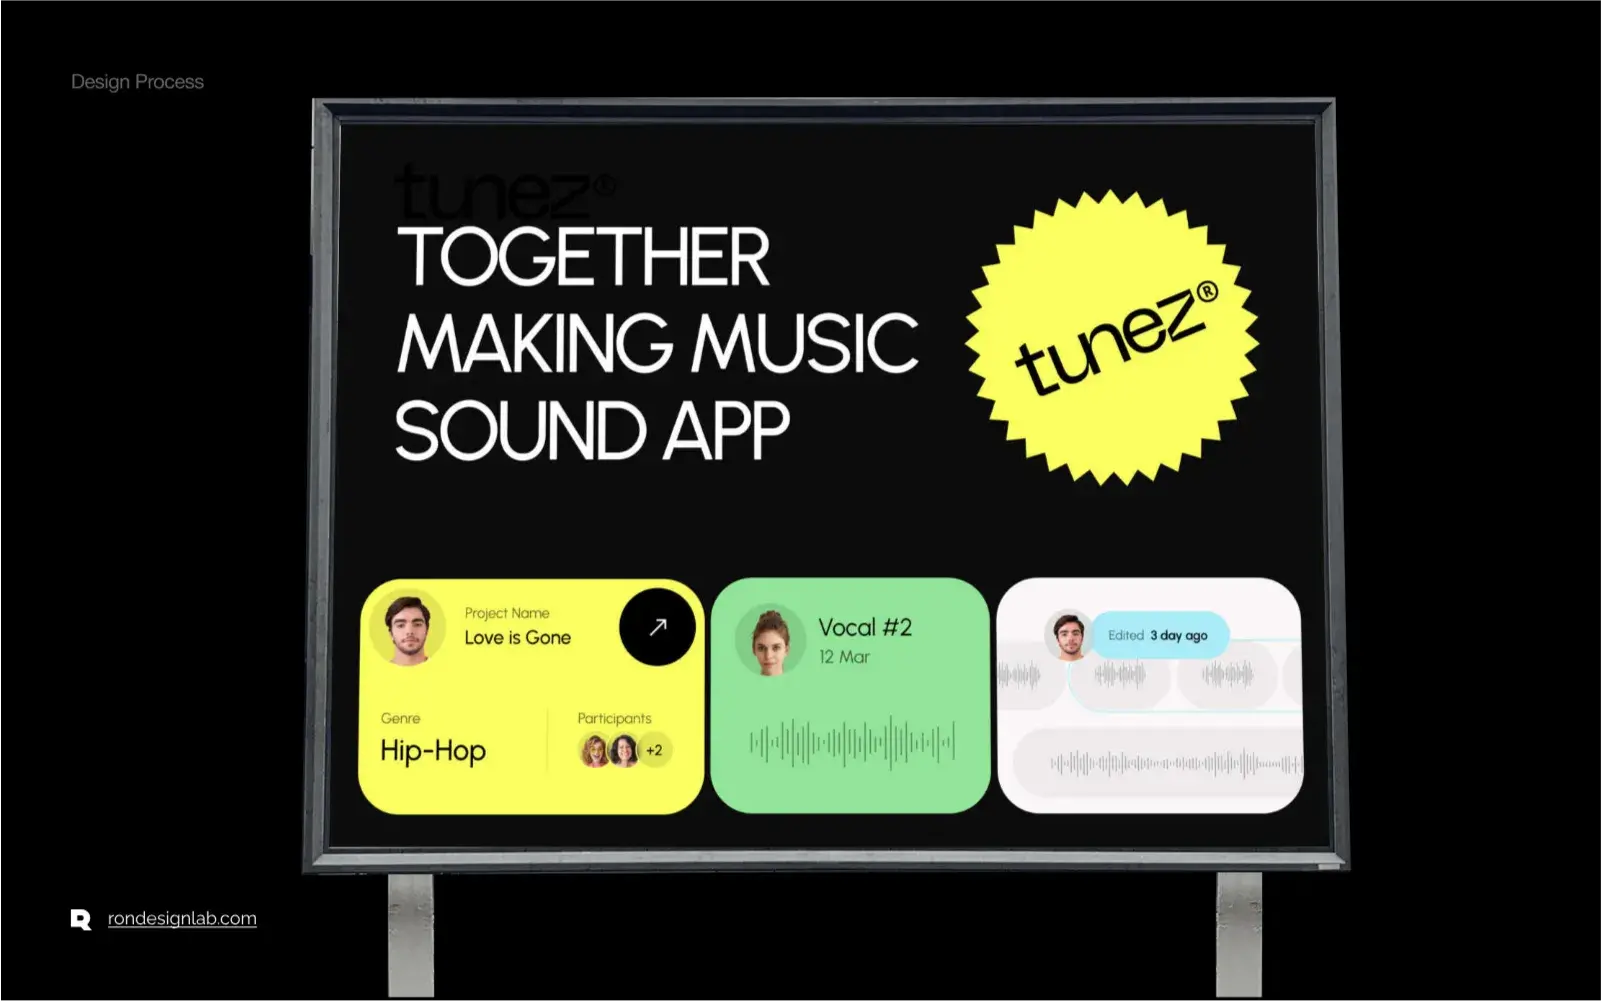 Tunez - Creating Music Together - Business